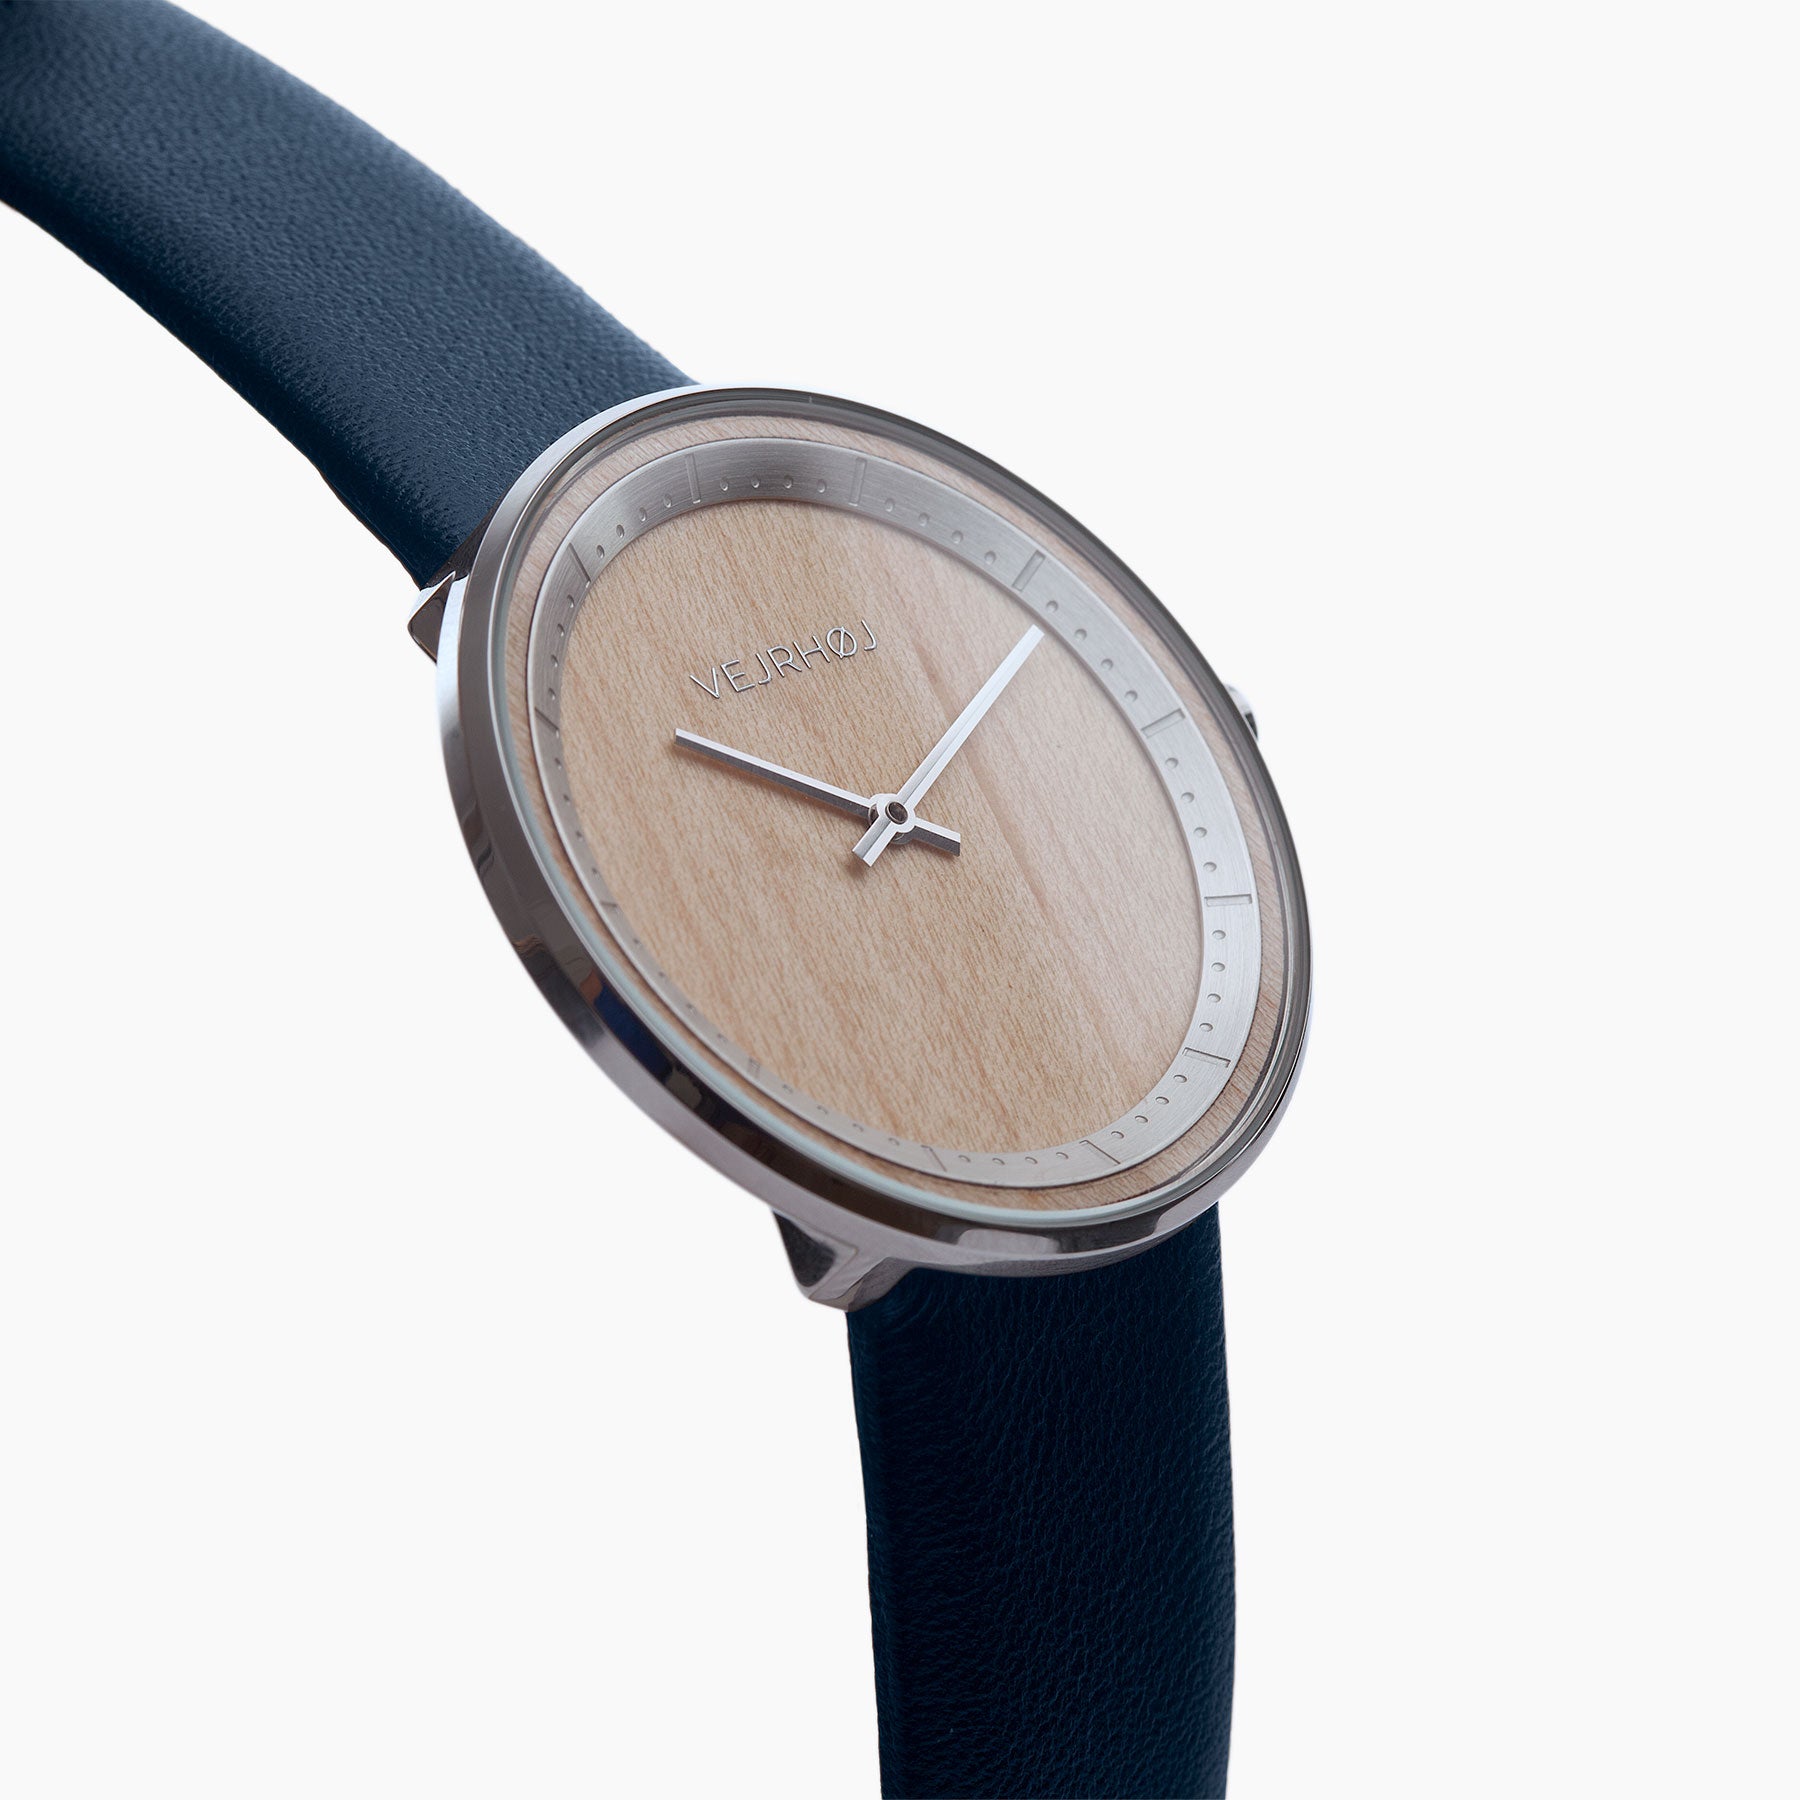 Simple wooden watch with steel casing and silver hands